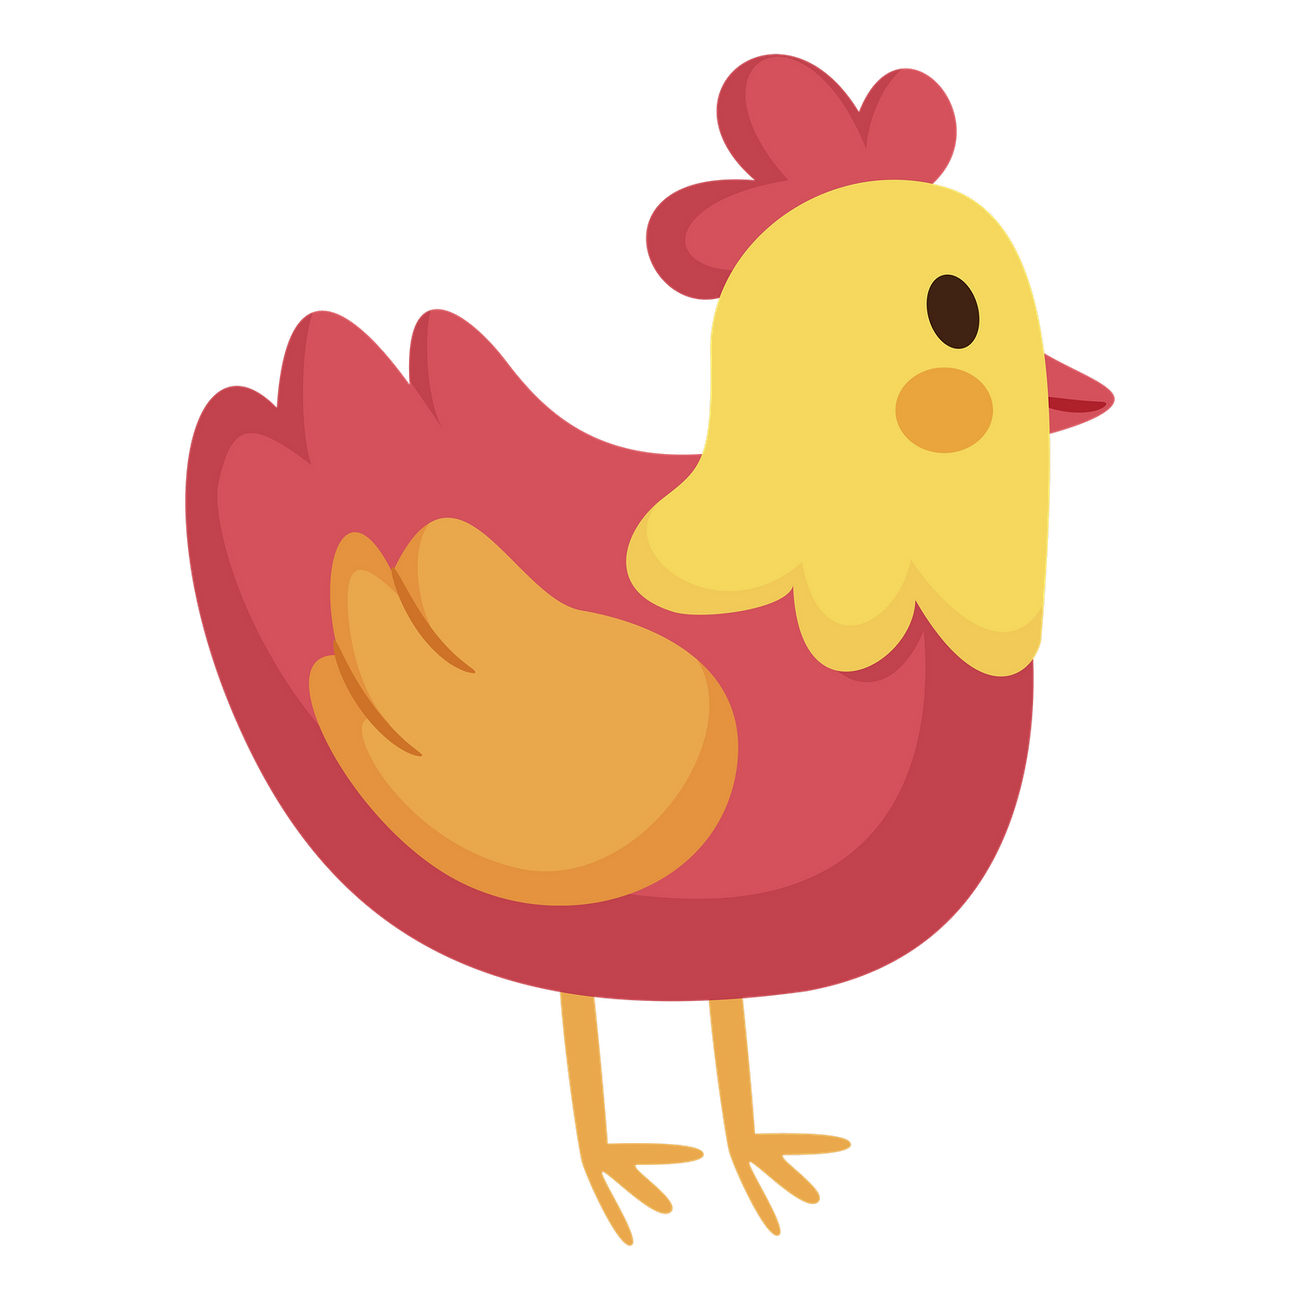 An illustrated chicken, representing the song title Dixie Chicken.